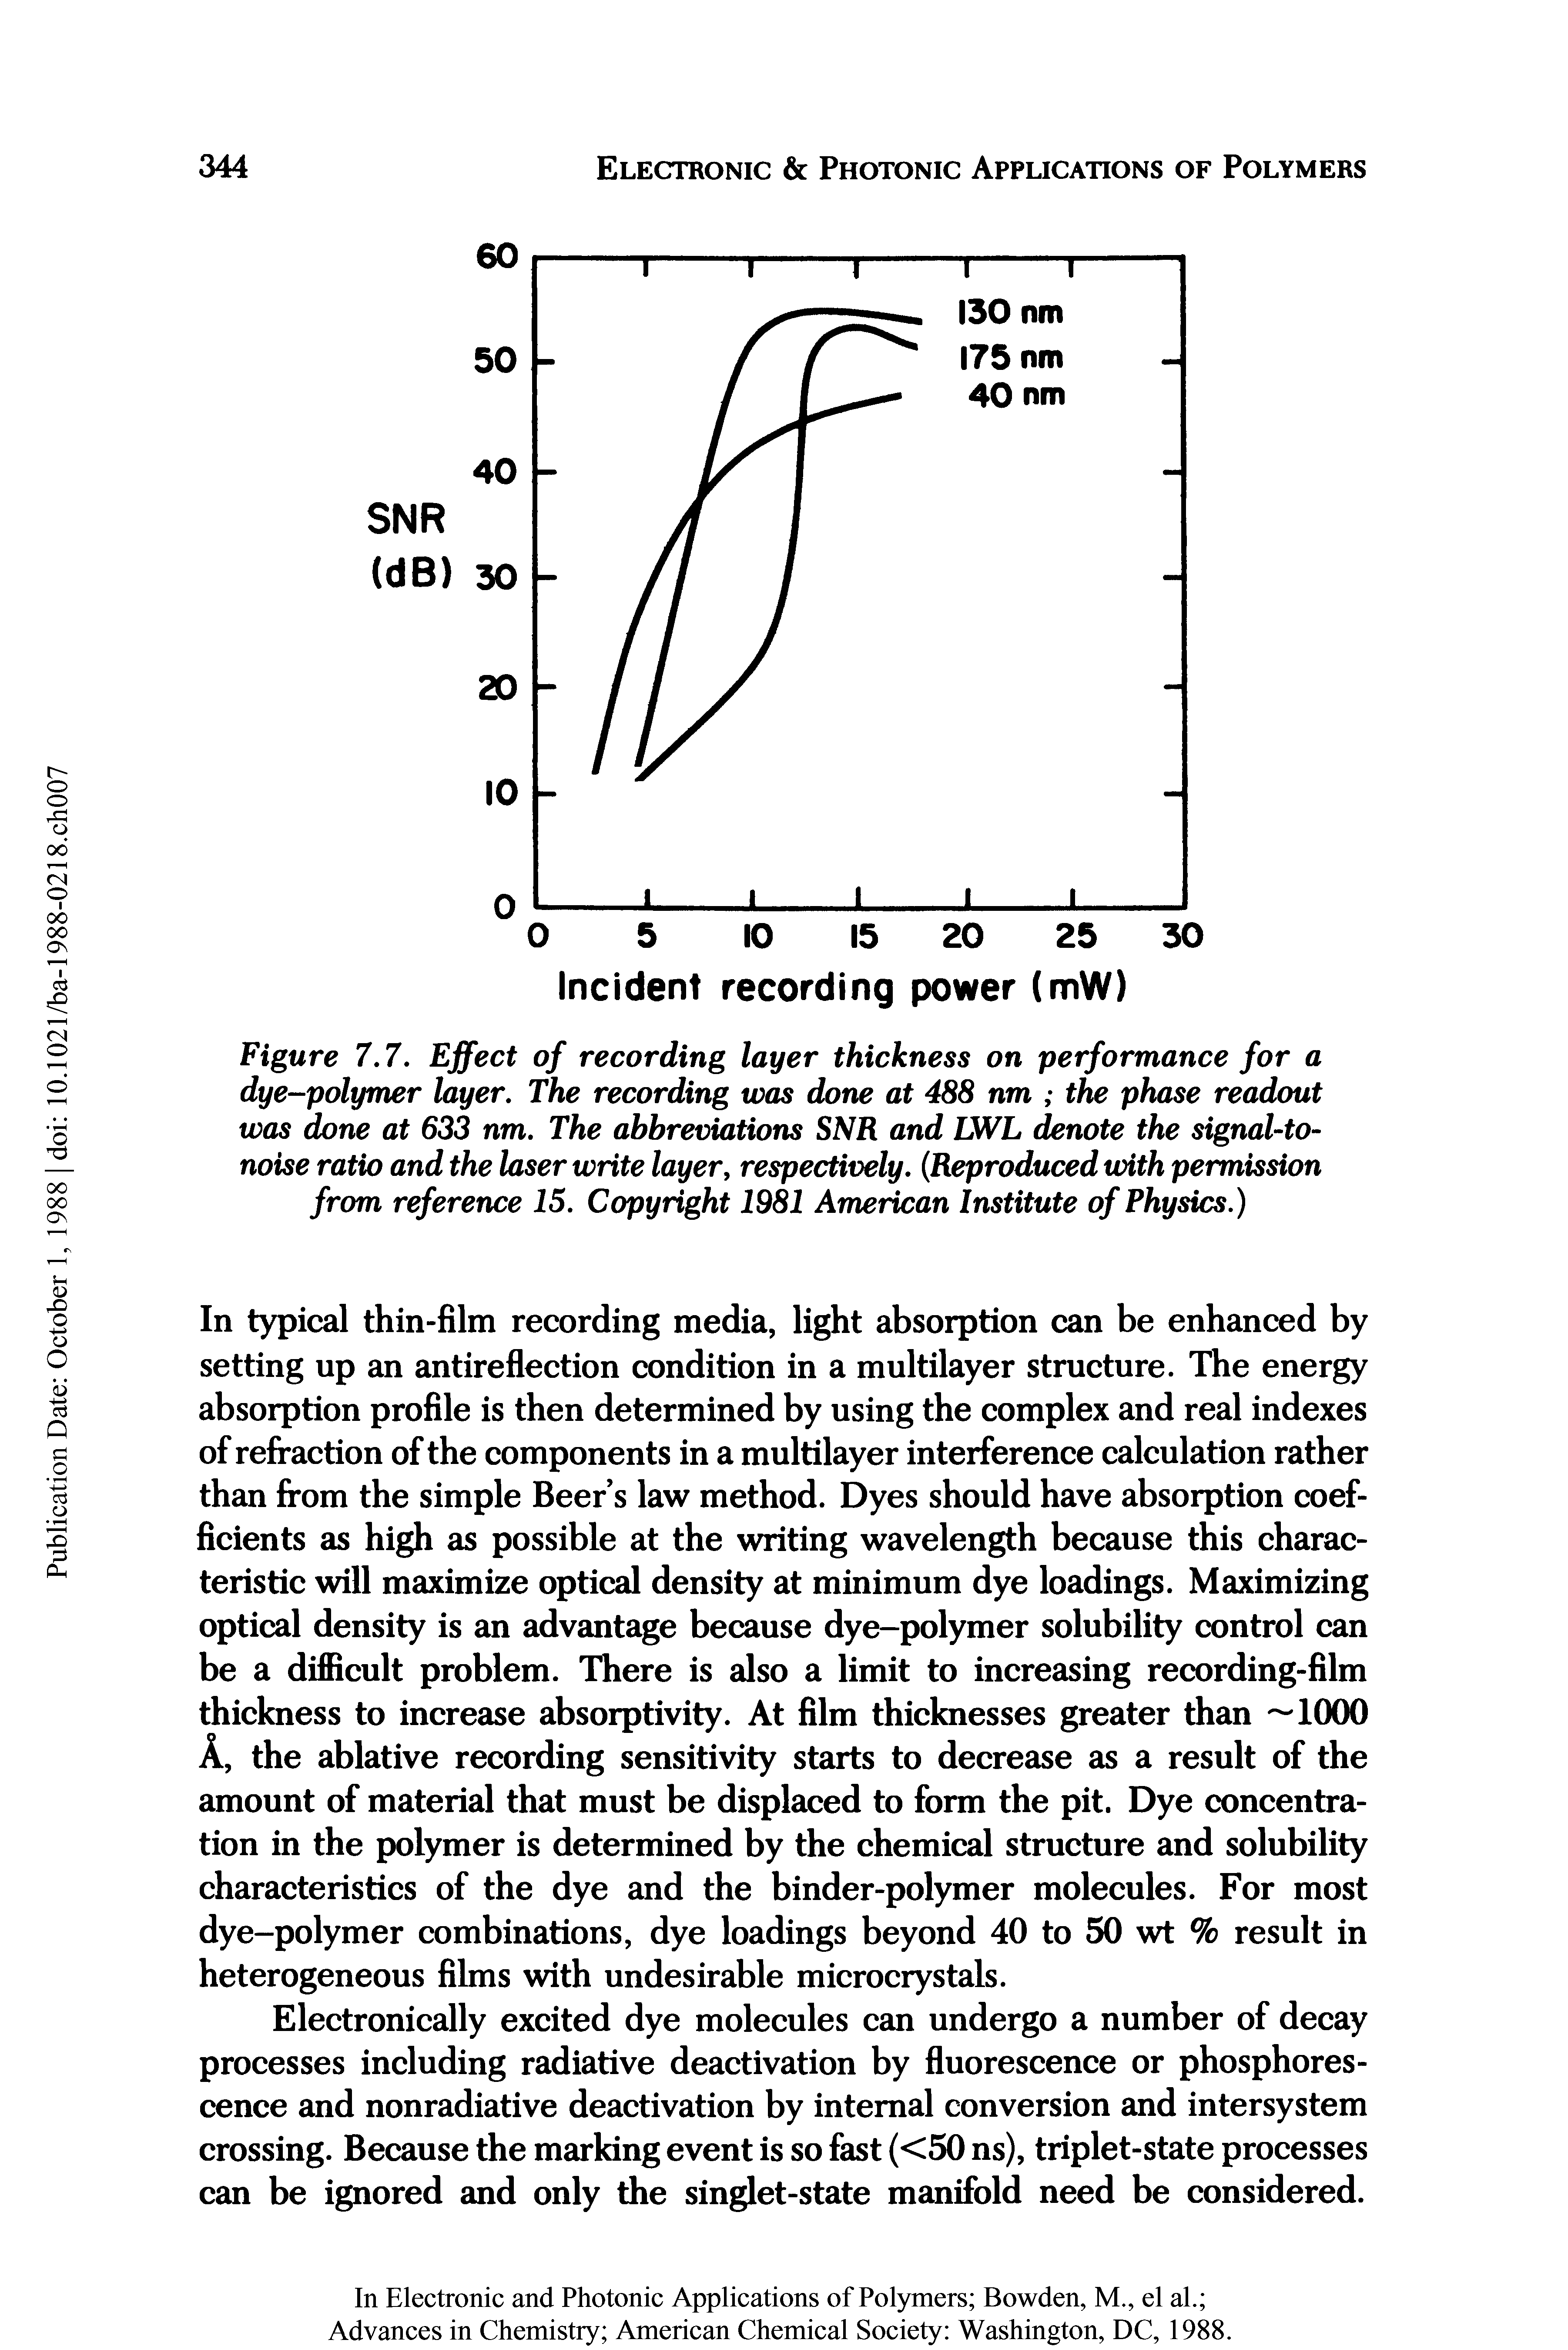 Figure 7.7. Effect of recording layer thickness on performance for a dye-polymer layer. The recording was done at 488 nm the phase readout was done at 633 nm. The abbreviations SNR and IWL denote the signal-to-noise ratio and the laser write layer, respectively. Reproduced with permission from reference 15. Copyright 1981 American Institute of Physics.)...